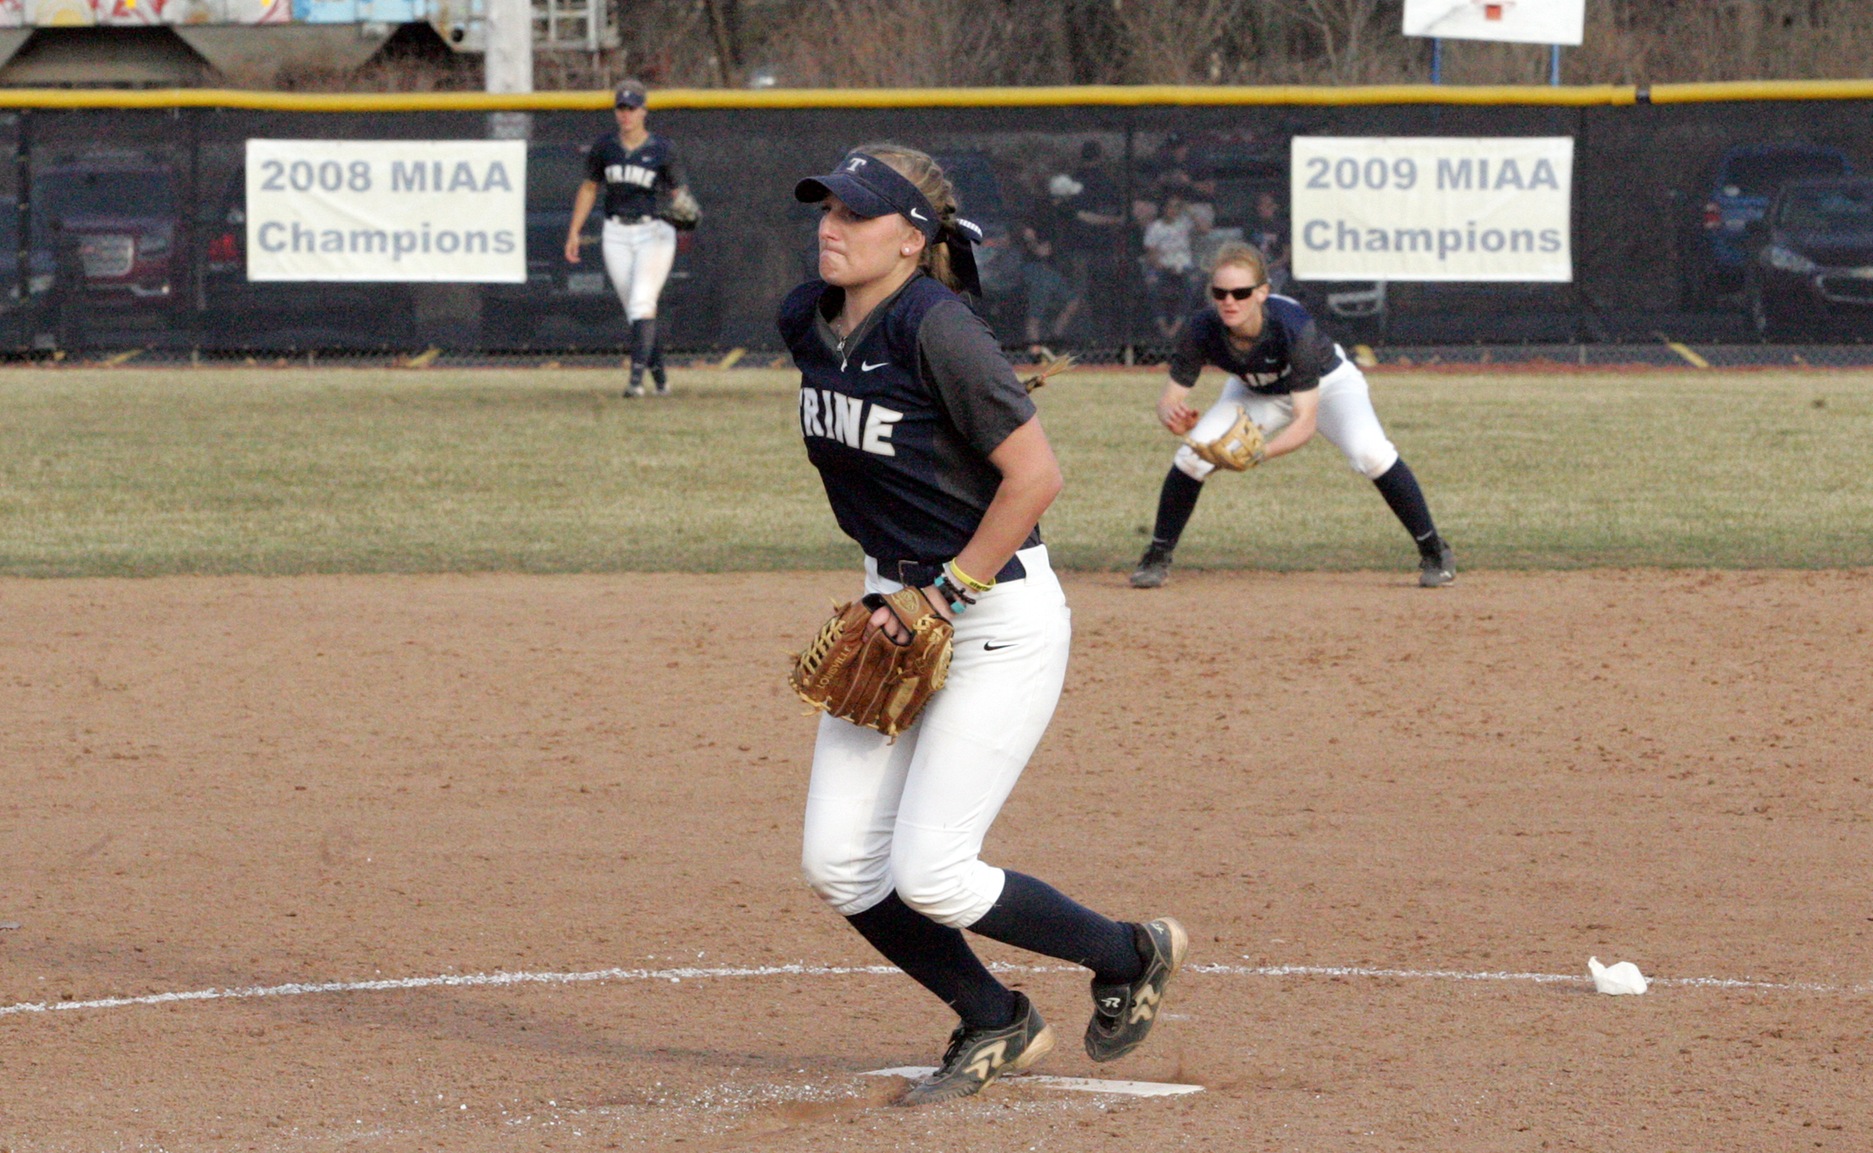 Softball Ranked Ninth in Latest Top 25 Poll